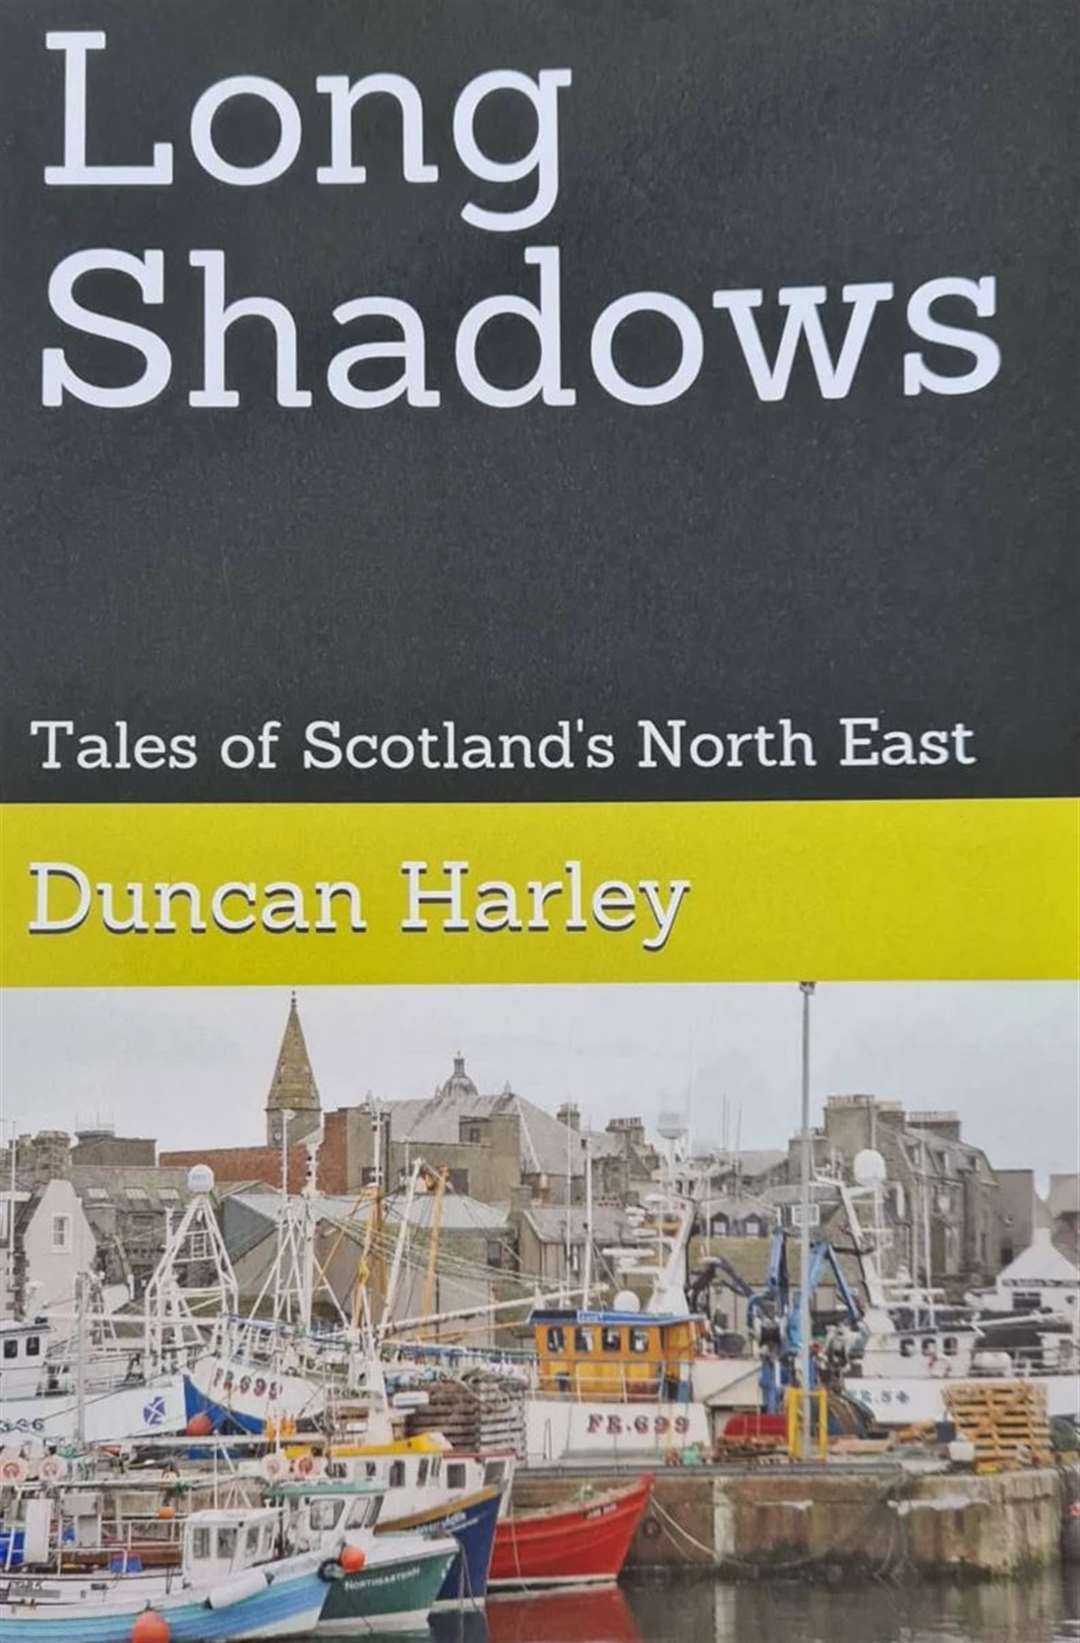 Long Shadows – Tales of Scotland’s North East expands on a series of articles Duncan Harley wrote for Leopard Magazine.